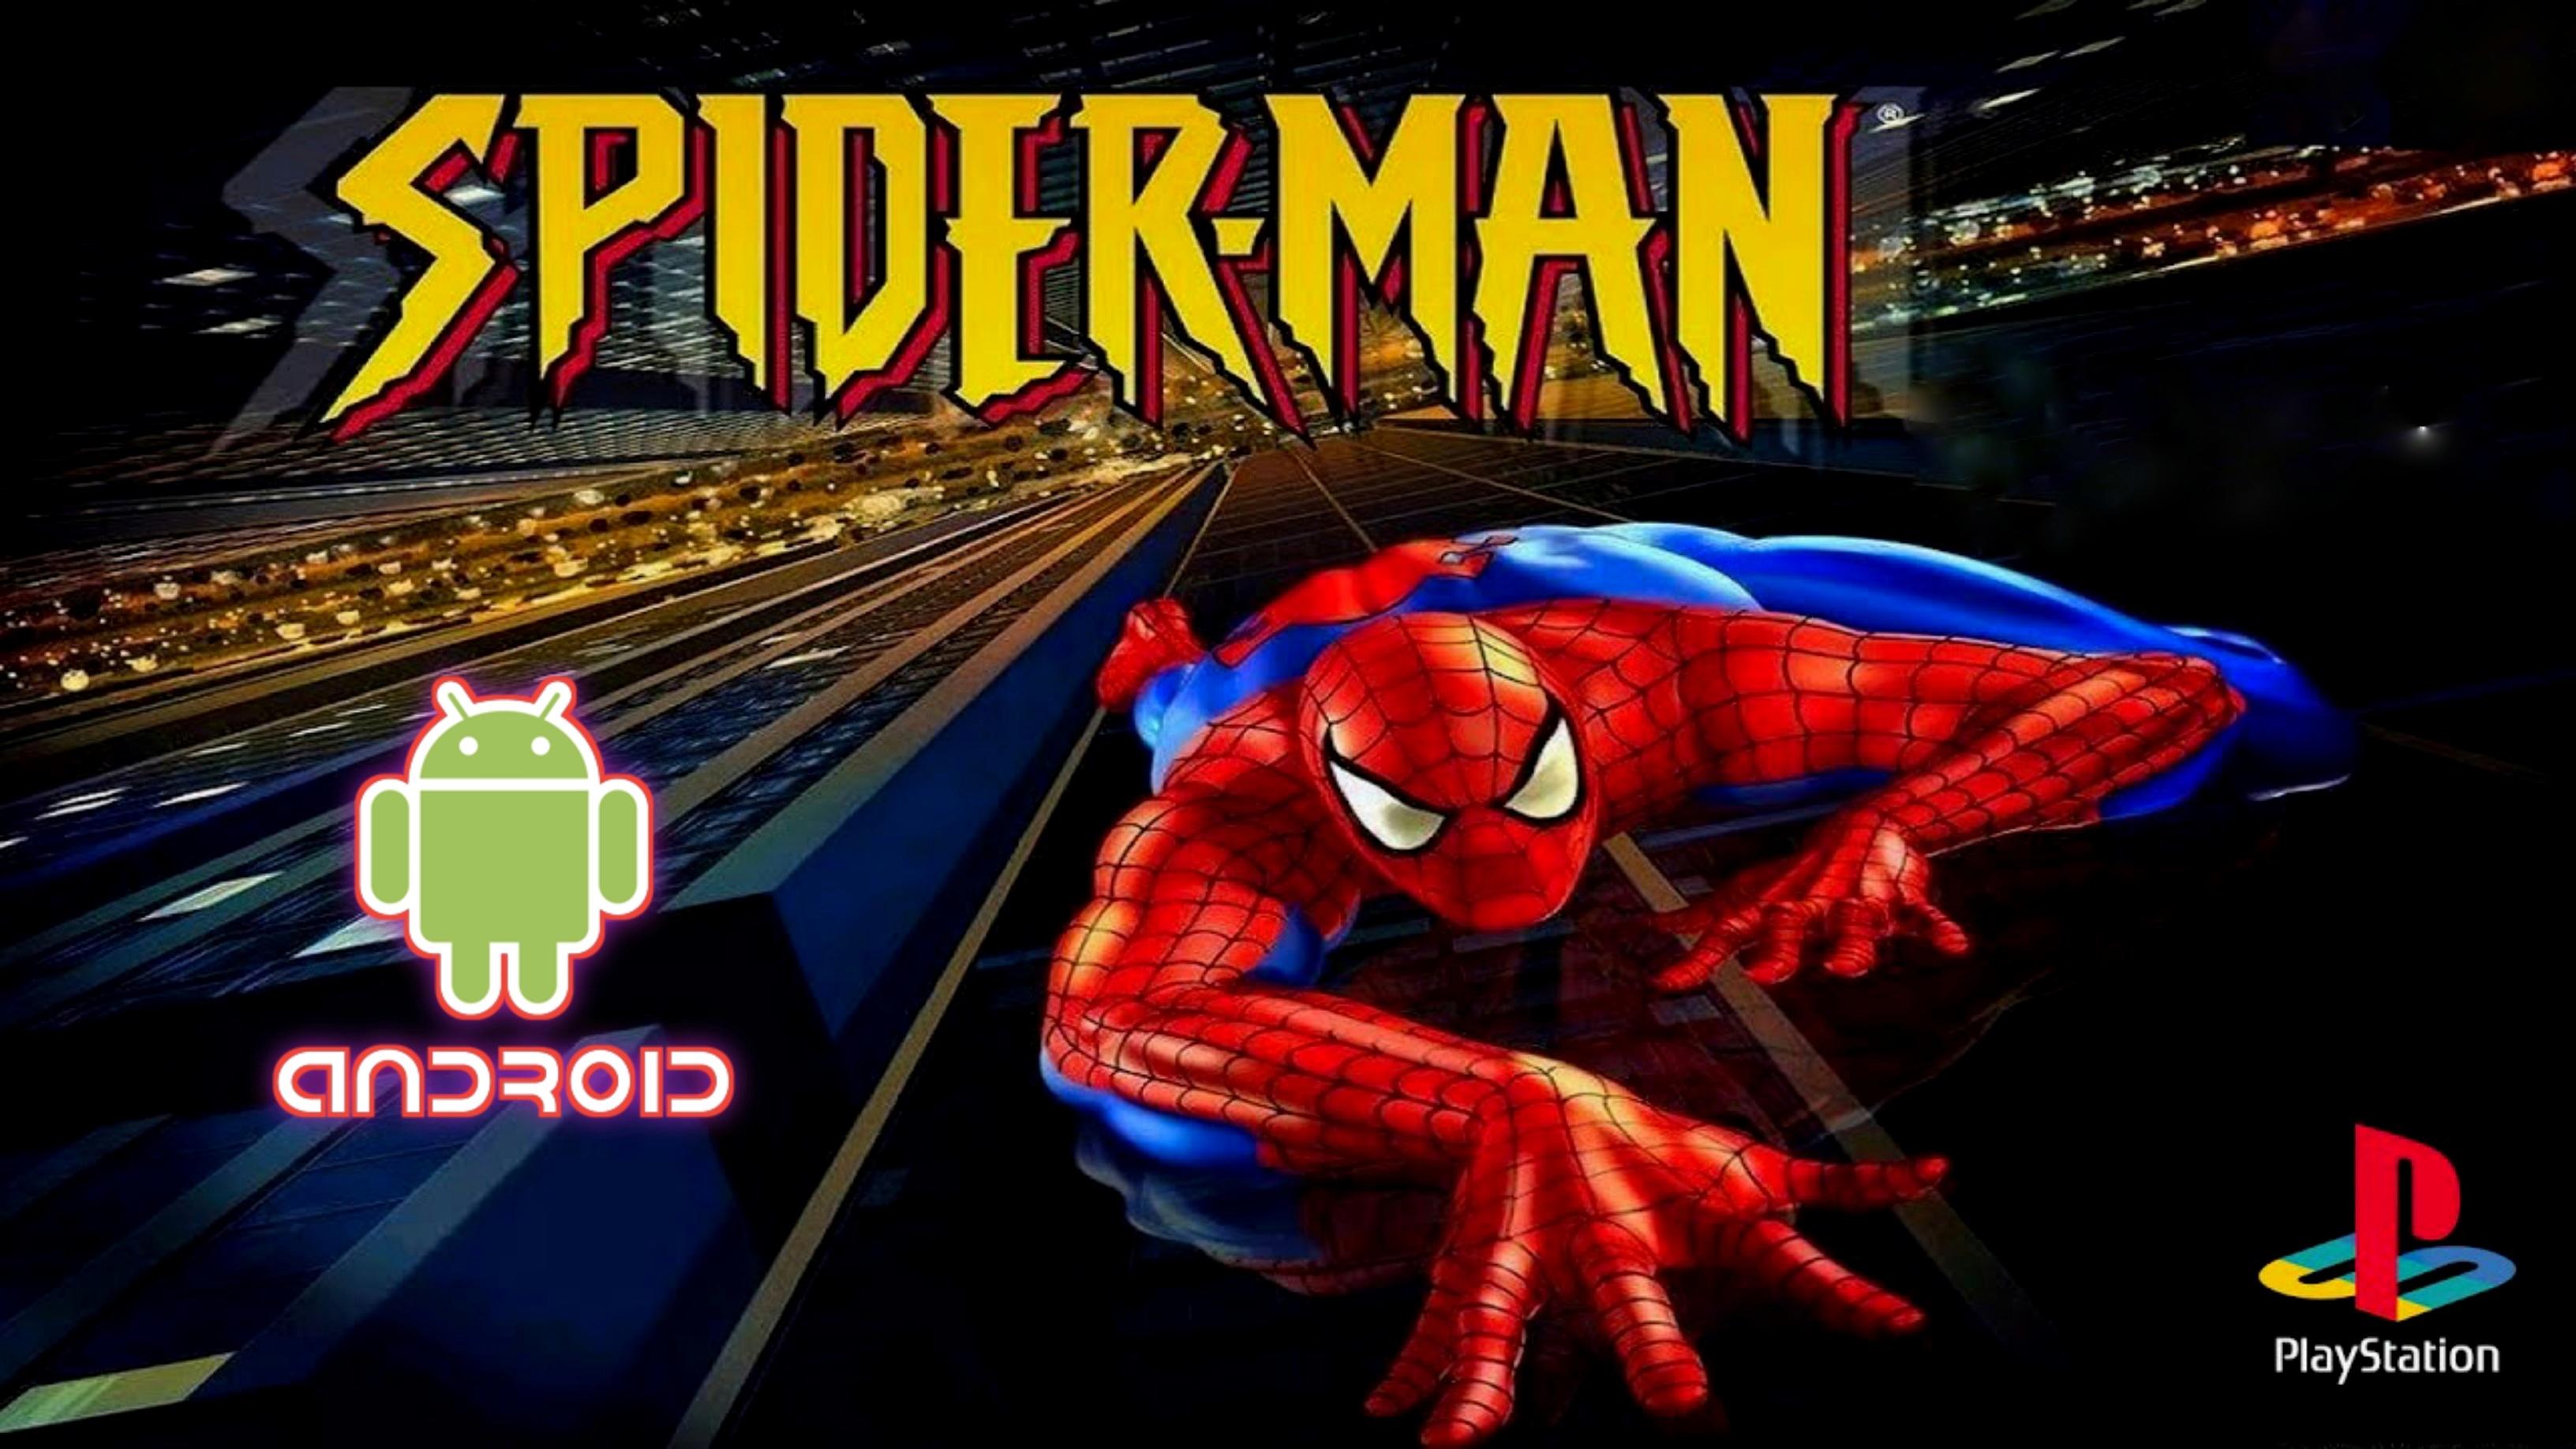 Spiderman ( PS1) on Android